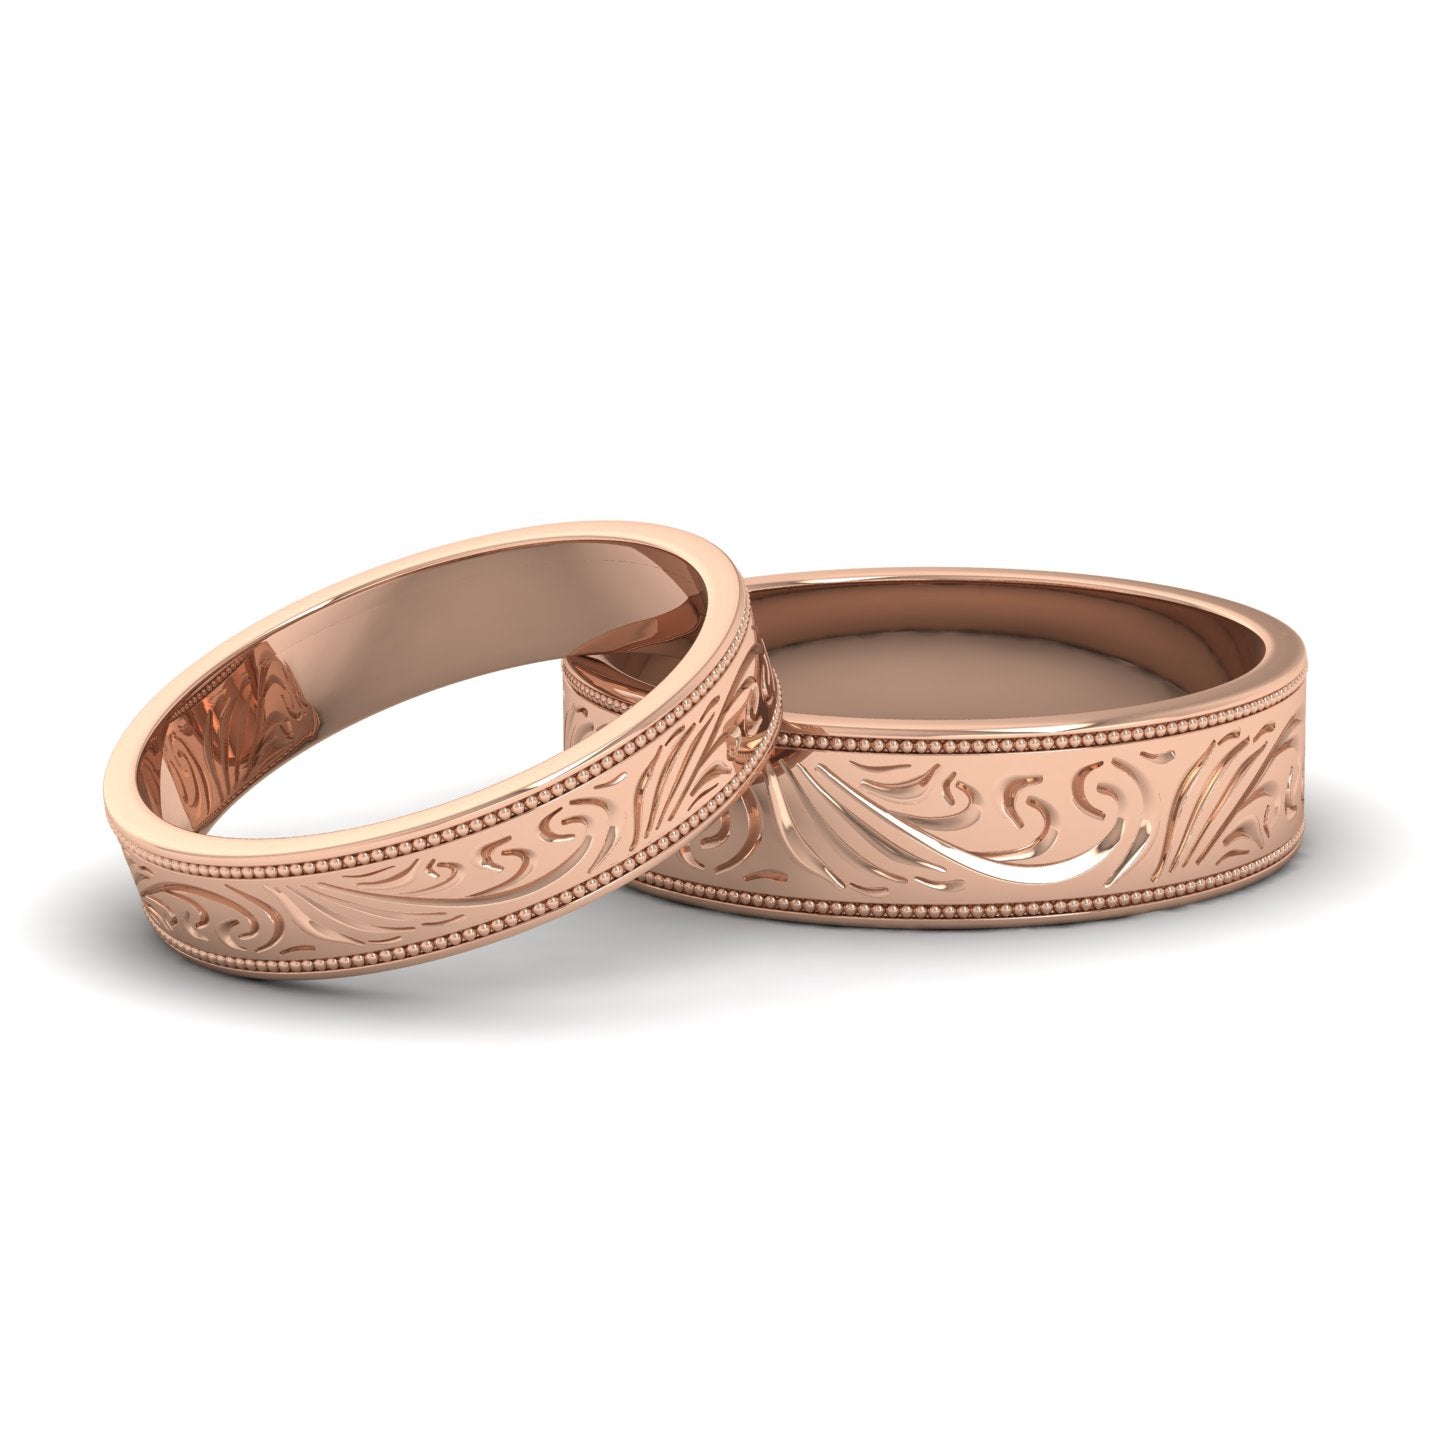 Engraved 9ct Rose Gold 6mm Flat Wedding Ring With Millgrain Edge